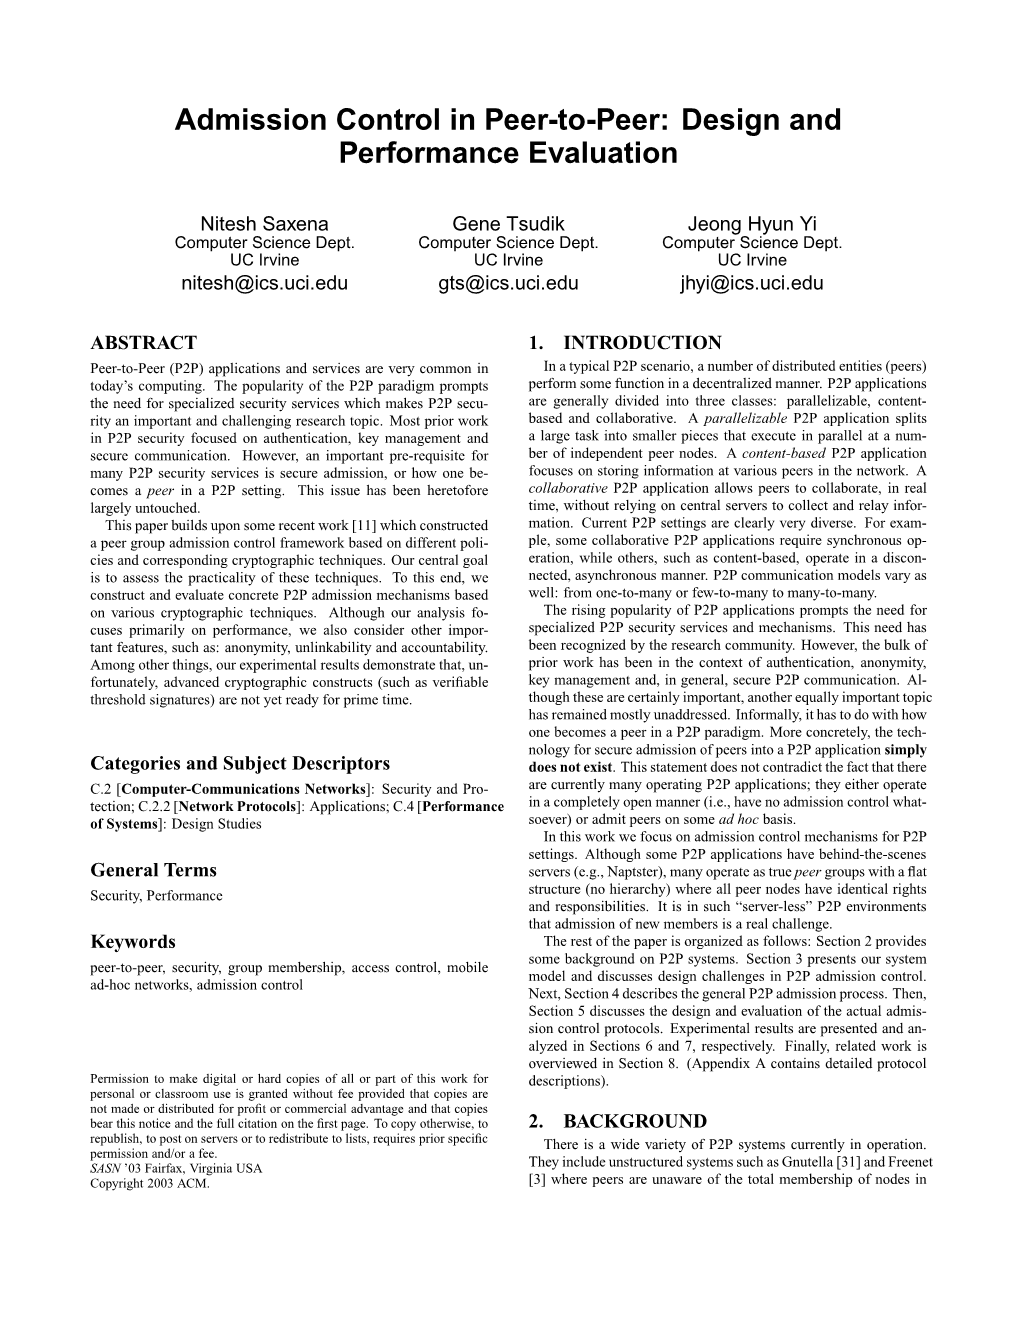 Admission Control in Peer-To-Peer: Design and Performance Evaluation